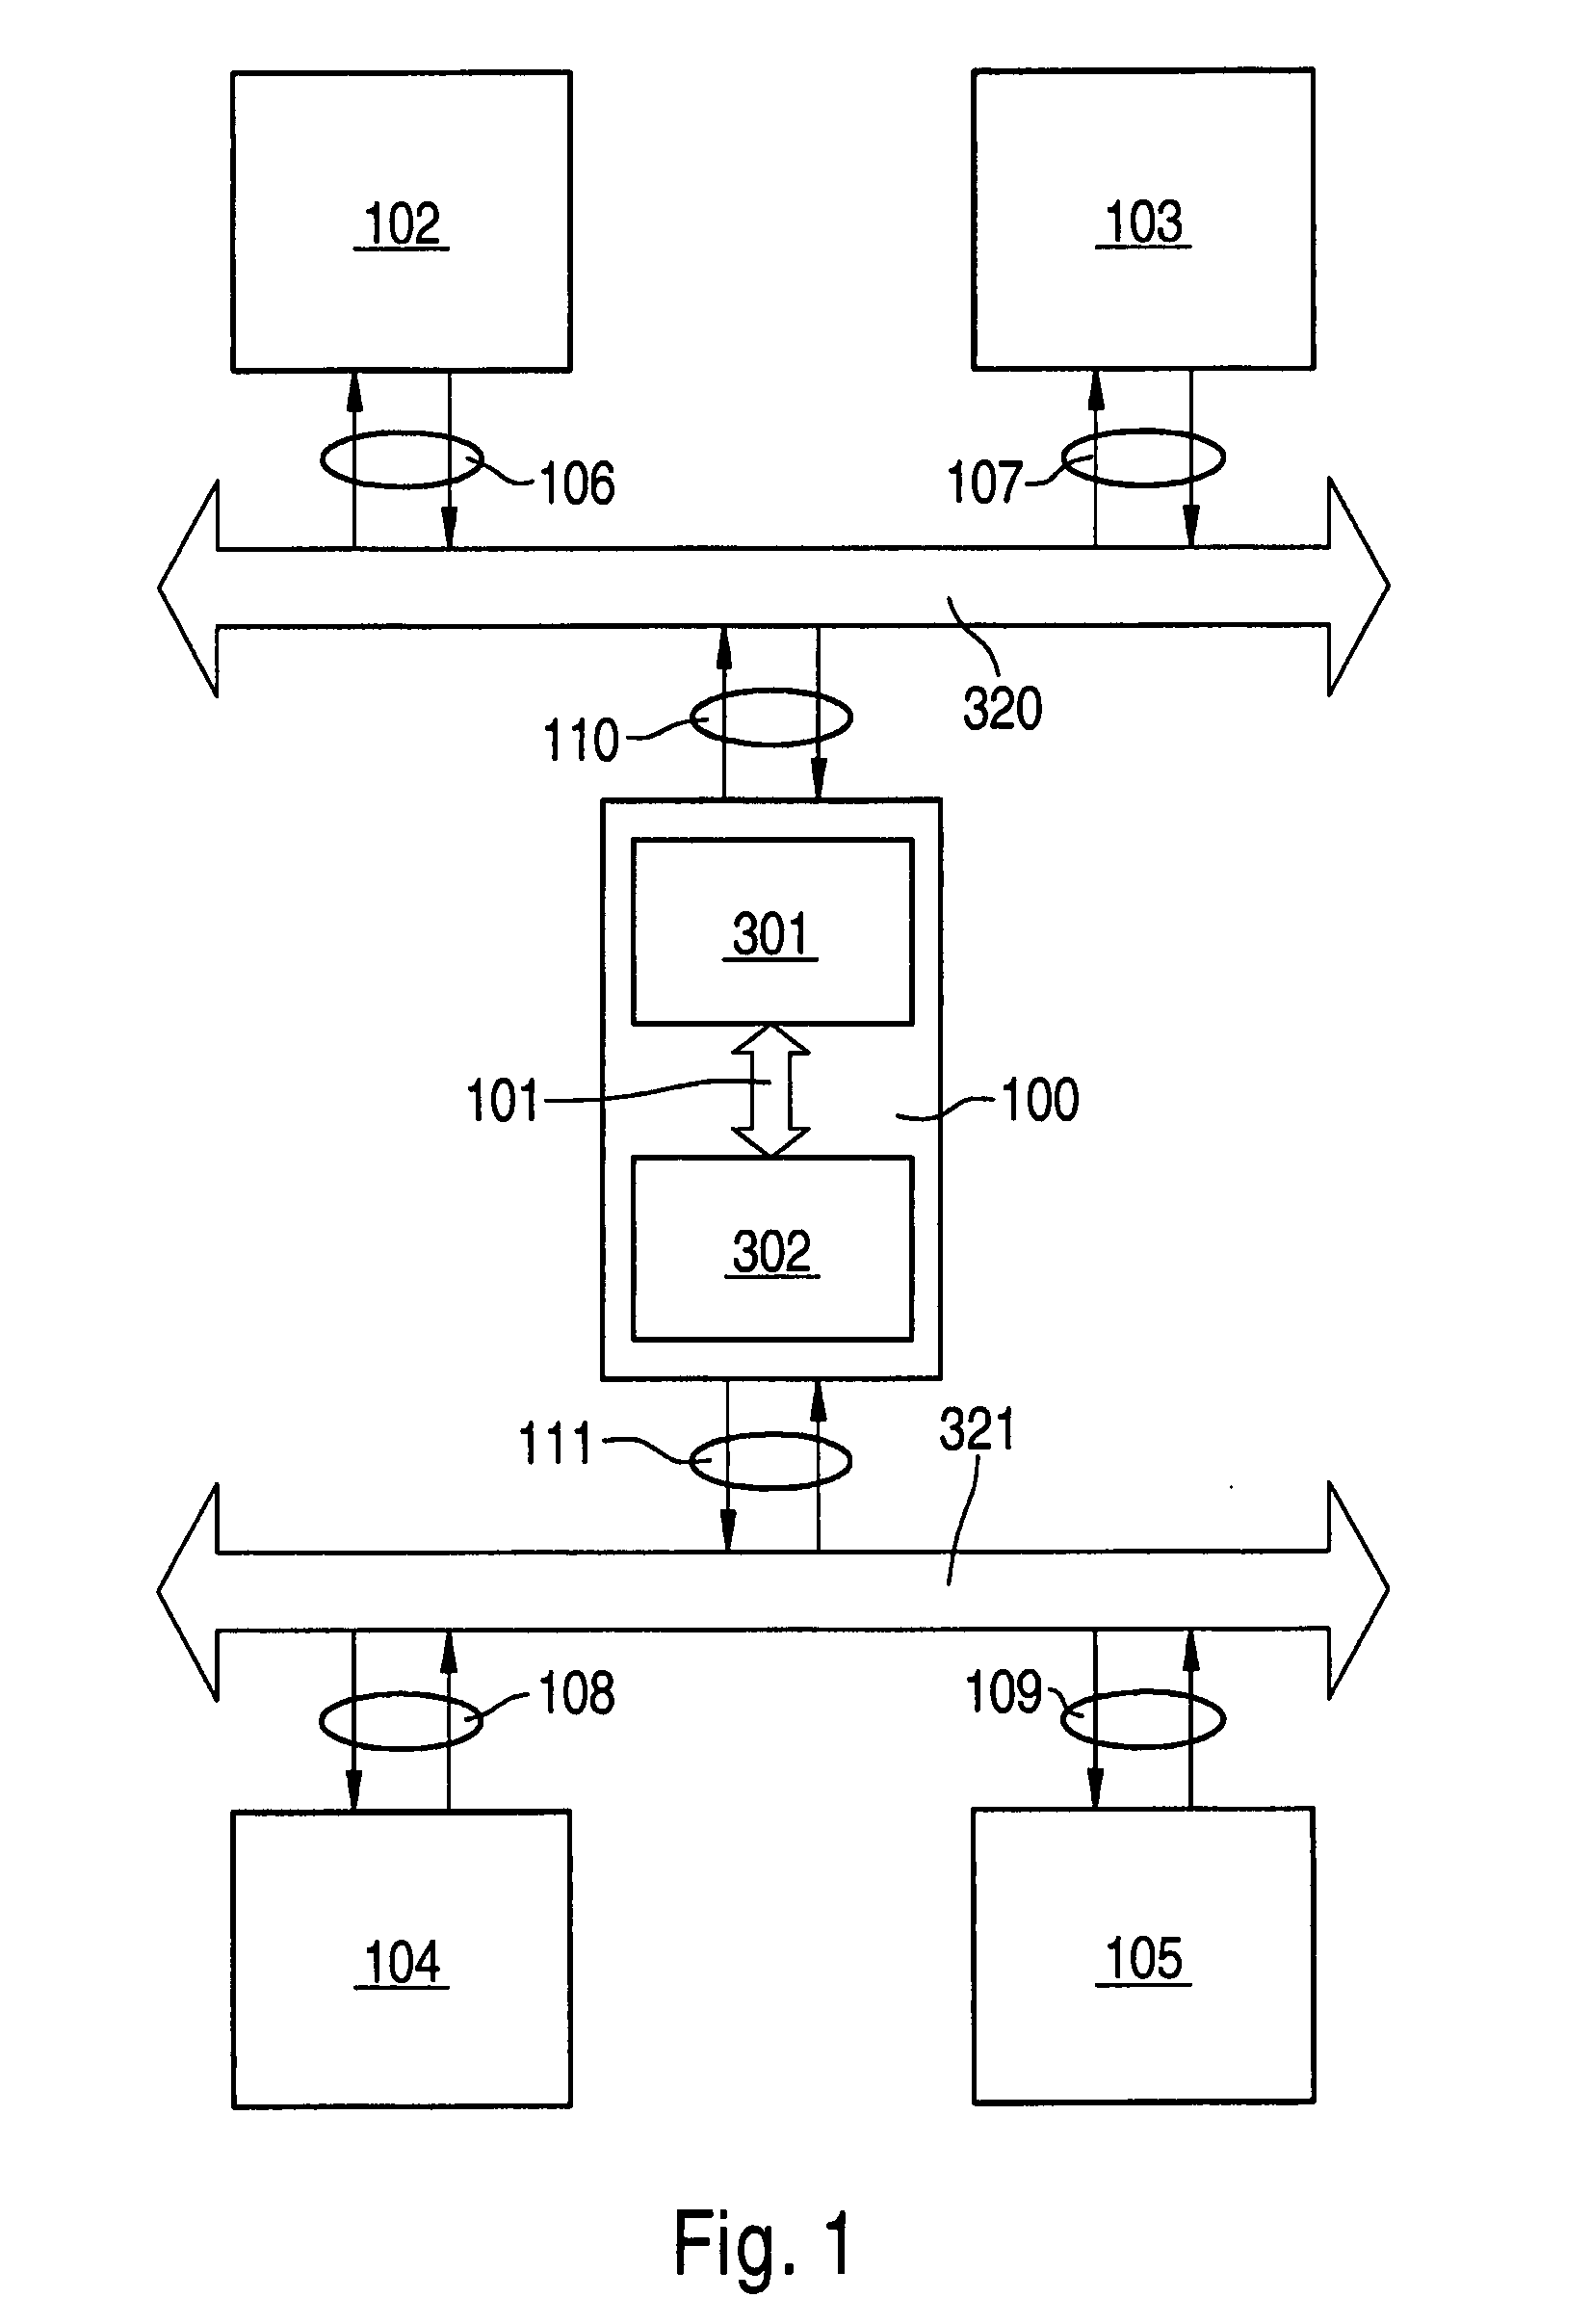 Method and device for synchronizing two bus systems by transmission of a time associated trigger signal from one system to another